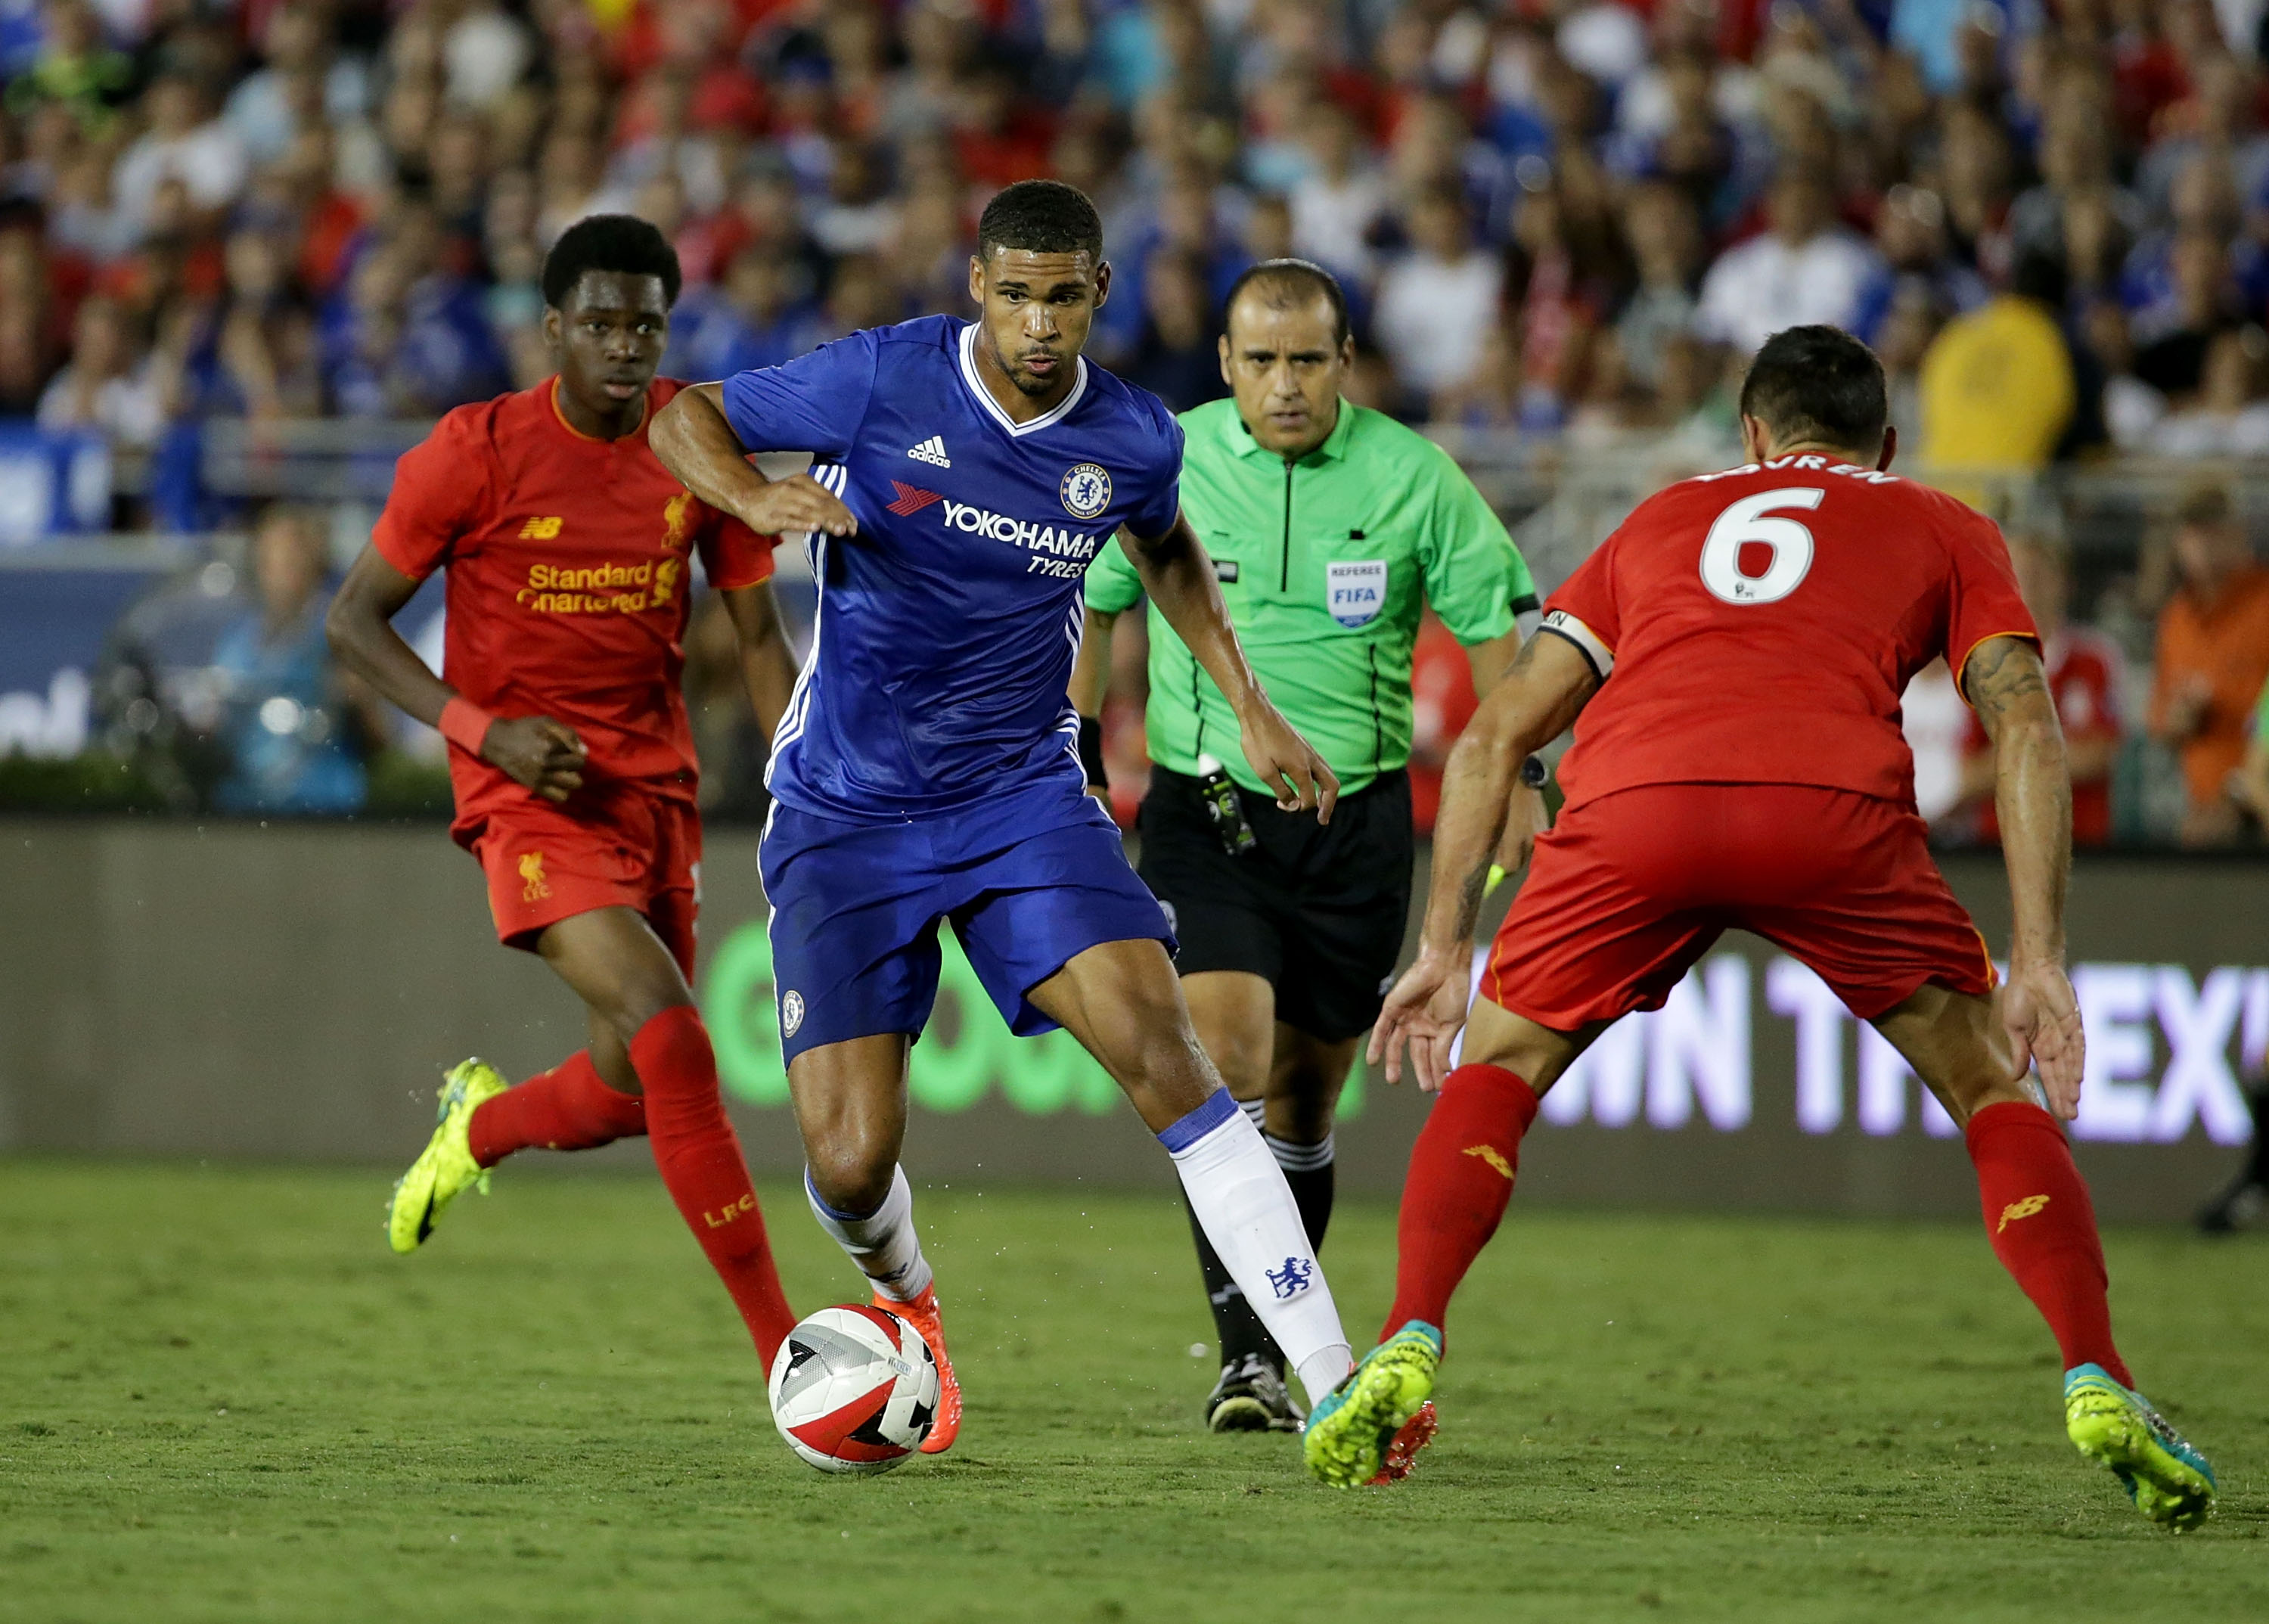 PASADENA, CA - JULY 27:  Ruben Loftus-Cheek #36 of Chelsea is defended by Dejan Lovren #6 of Liverpool during the 2016 International Champions Cup at Rose Bowl on July 27, 2016 in Pasadena, California.  (Photo by Jeff Gross/Getty Images)